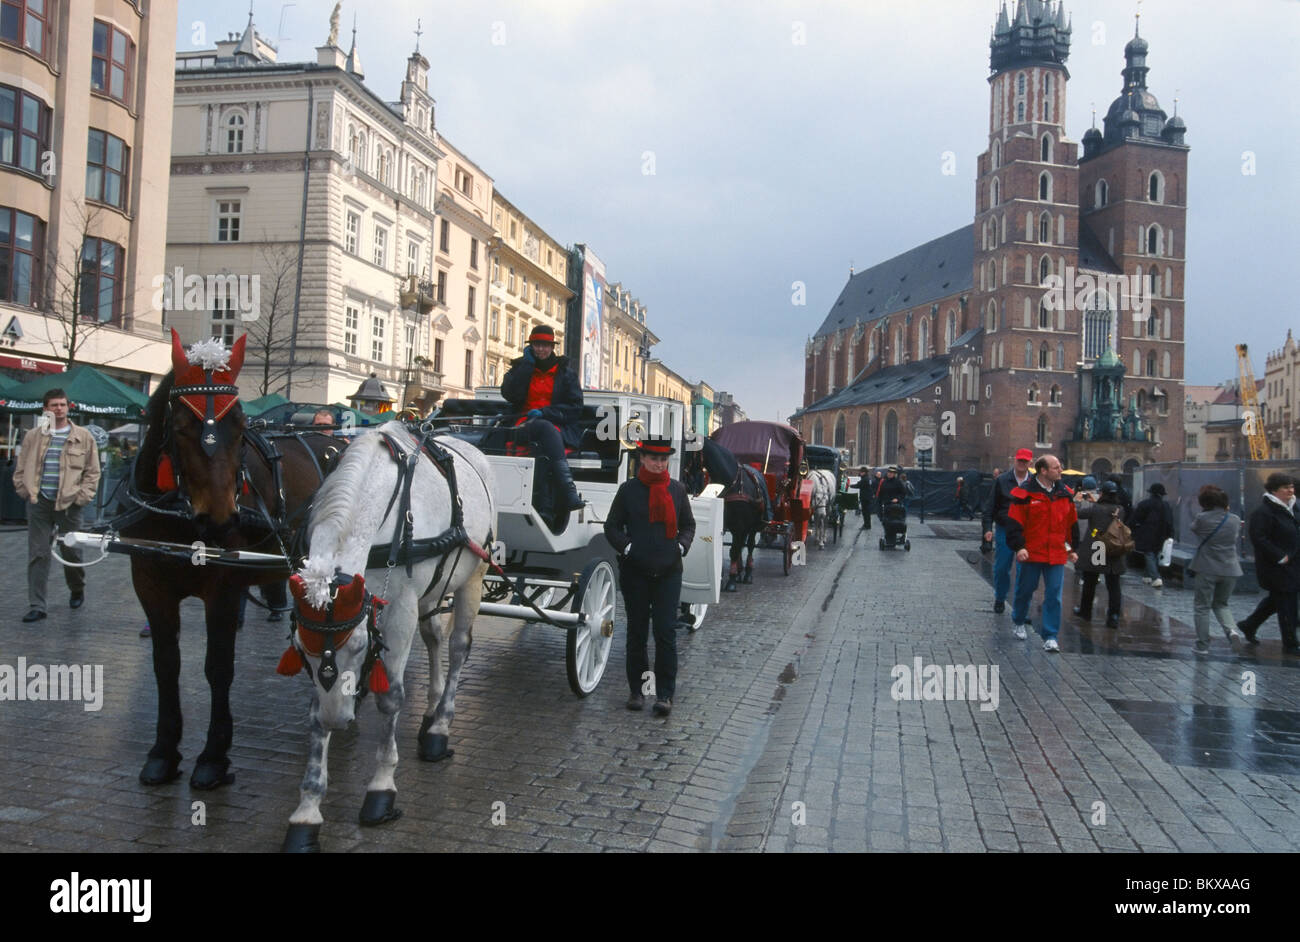 Krakow, April 2010 -- Horse-drawn carriage on main market square. St. Mary's Basilica is in the background. Stock Photo